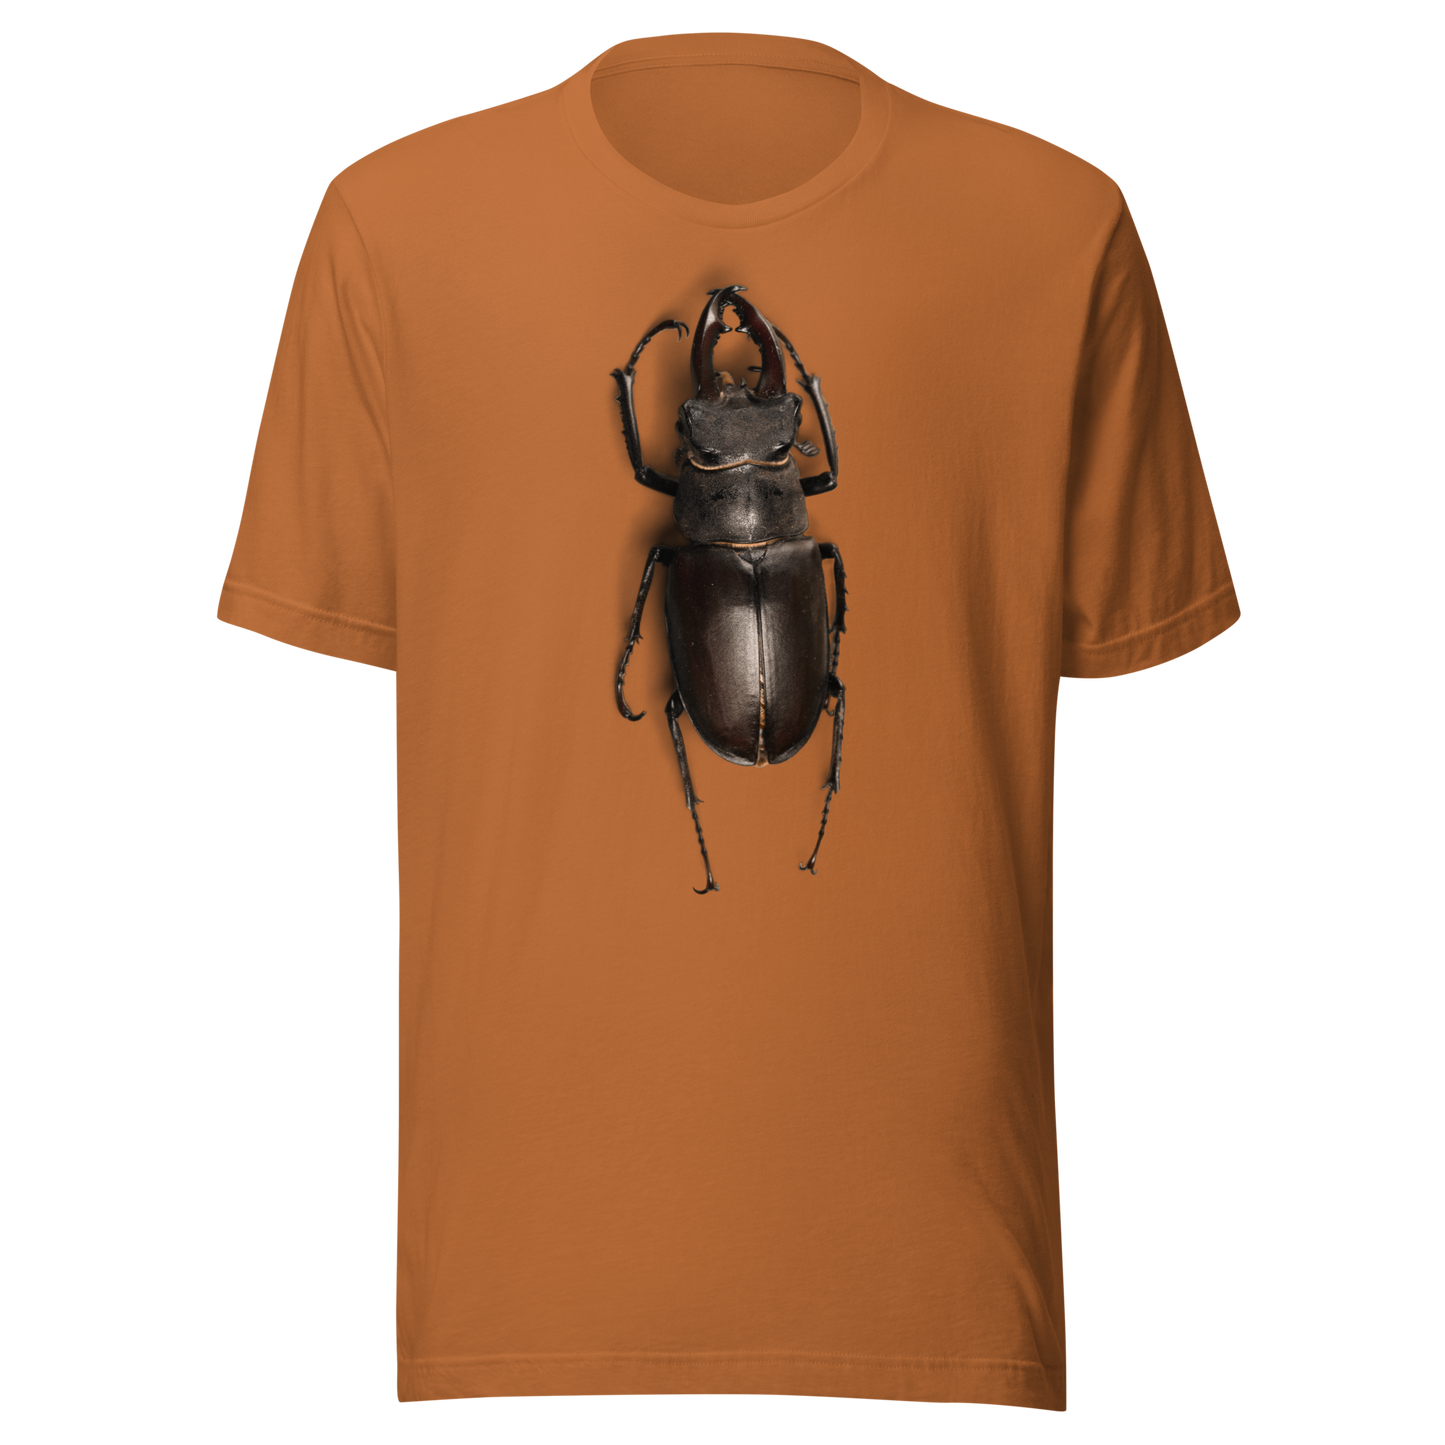 Get Noticed with Our Unisex T-Shirt Featuring a Giant Beetle Print